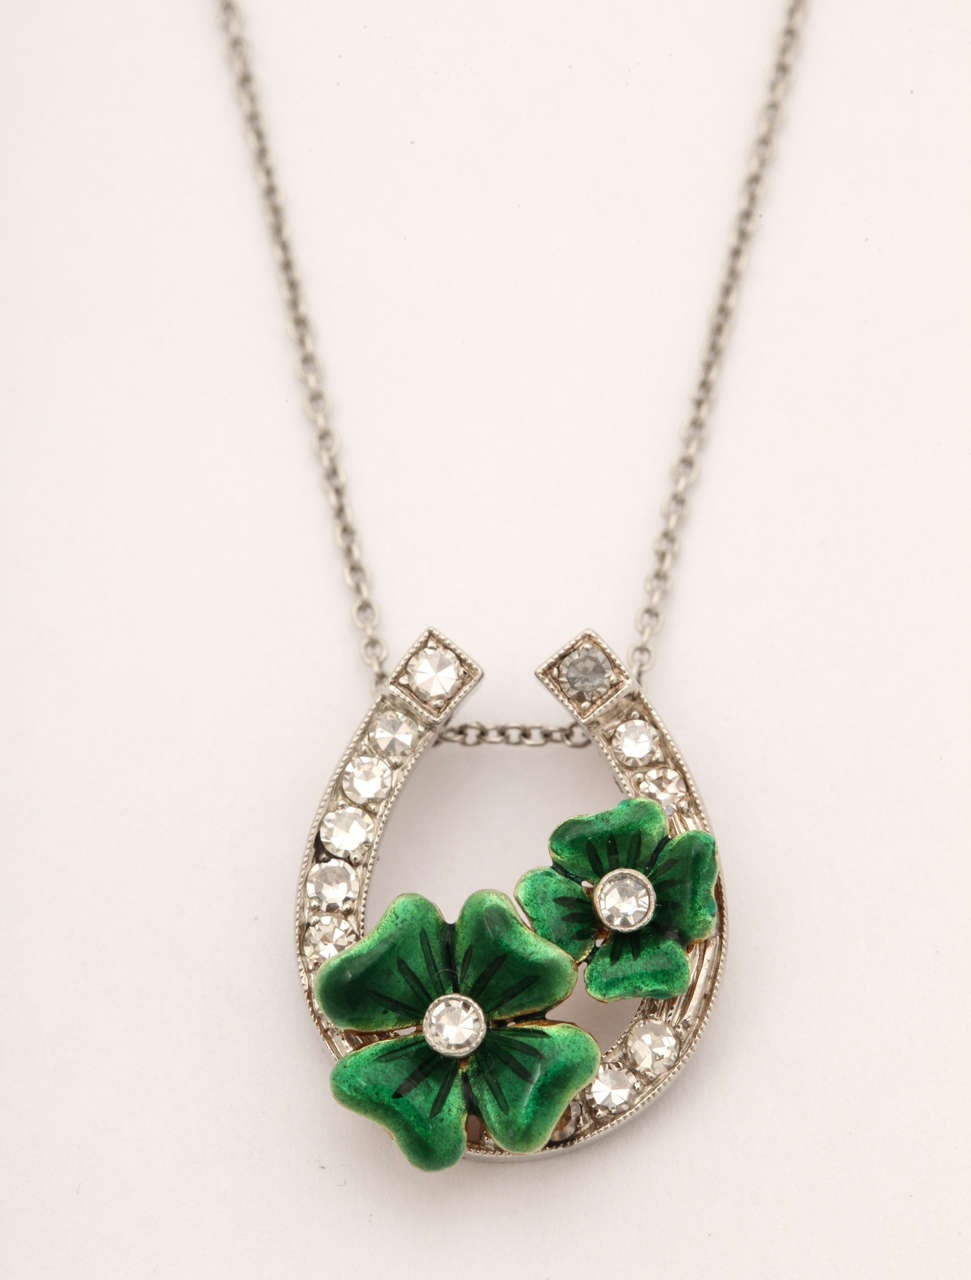 A classical Good Luck token for the horseracing enthusiast or signifying good fortune in any endeavor. This pendant is made in the king of metals, platinum, enhanced with brilliant diamonds and 2 green enamel four leaf clovers.The chain is 17.5 in.